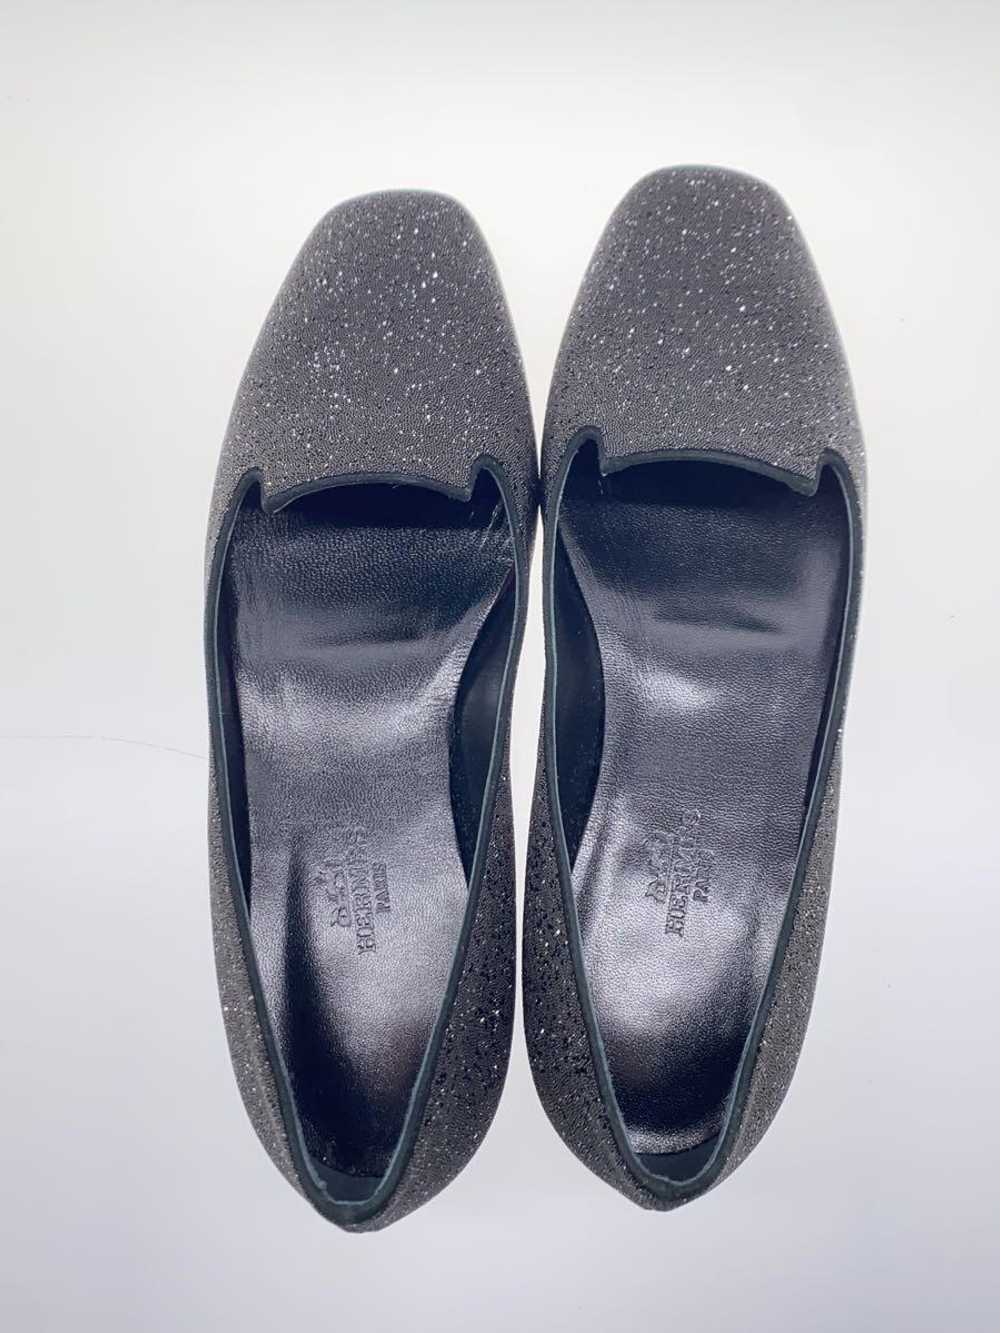 Hermes Flat Shoes/36/Blk/Glitter/ Shoes Bf220 - image 3